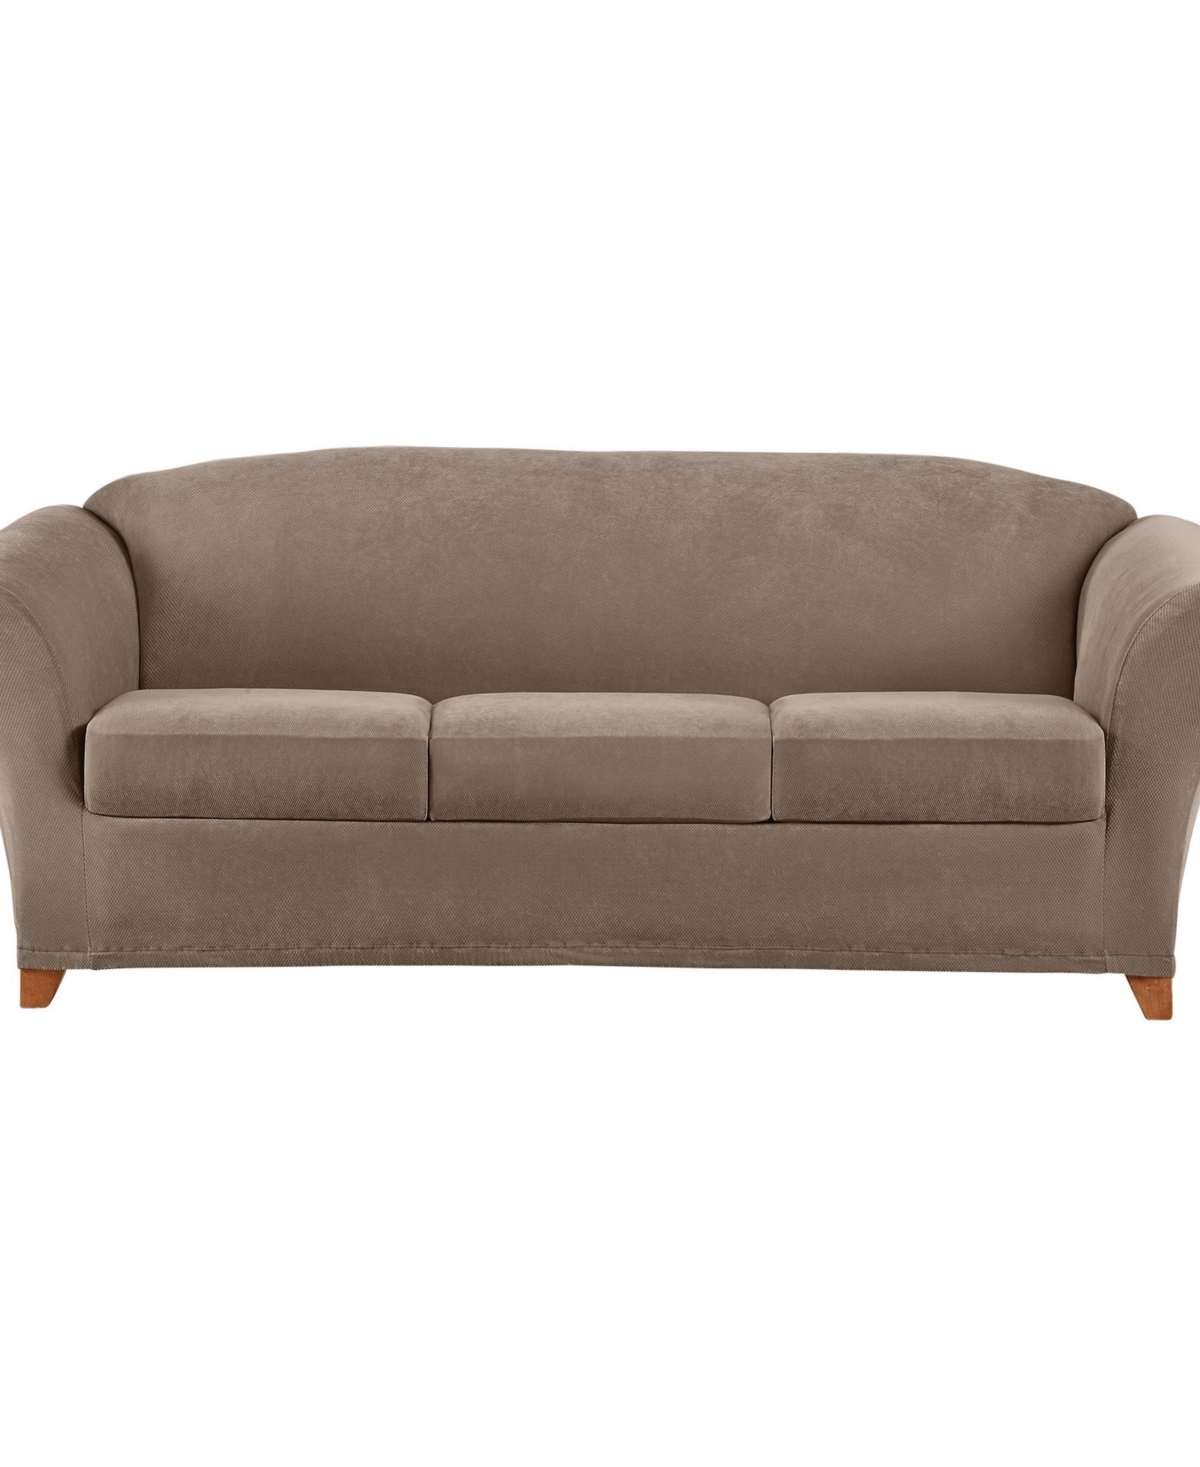 Sure Fit Stretch Pique 4-pc Sofa Slipcover Set, 96" X 40" In Taupe